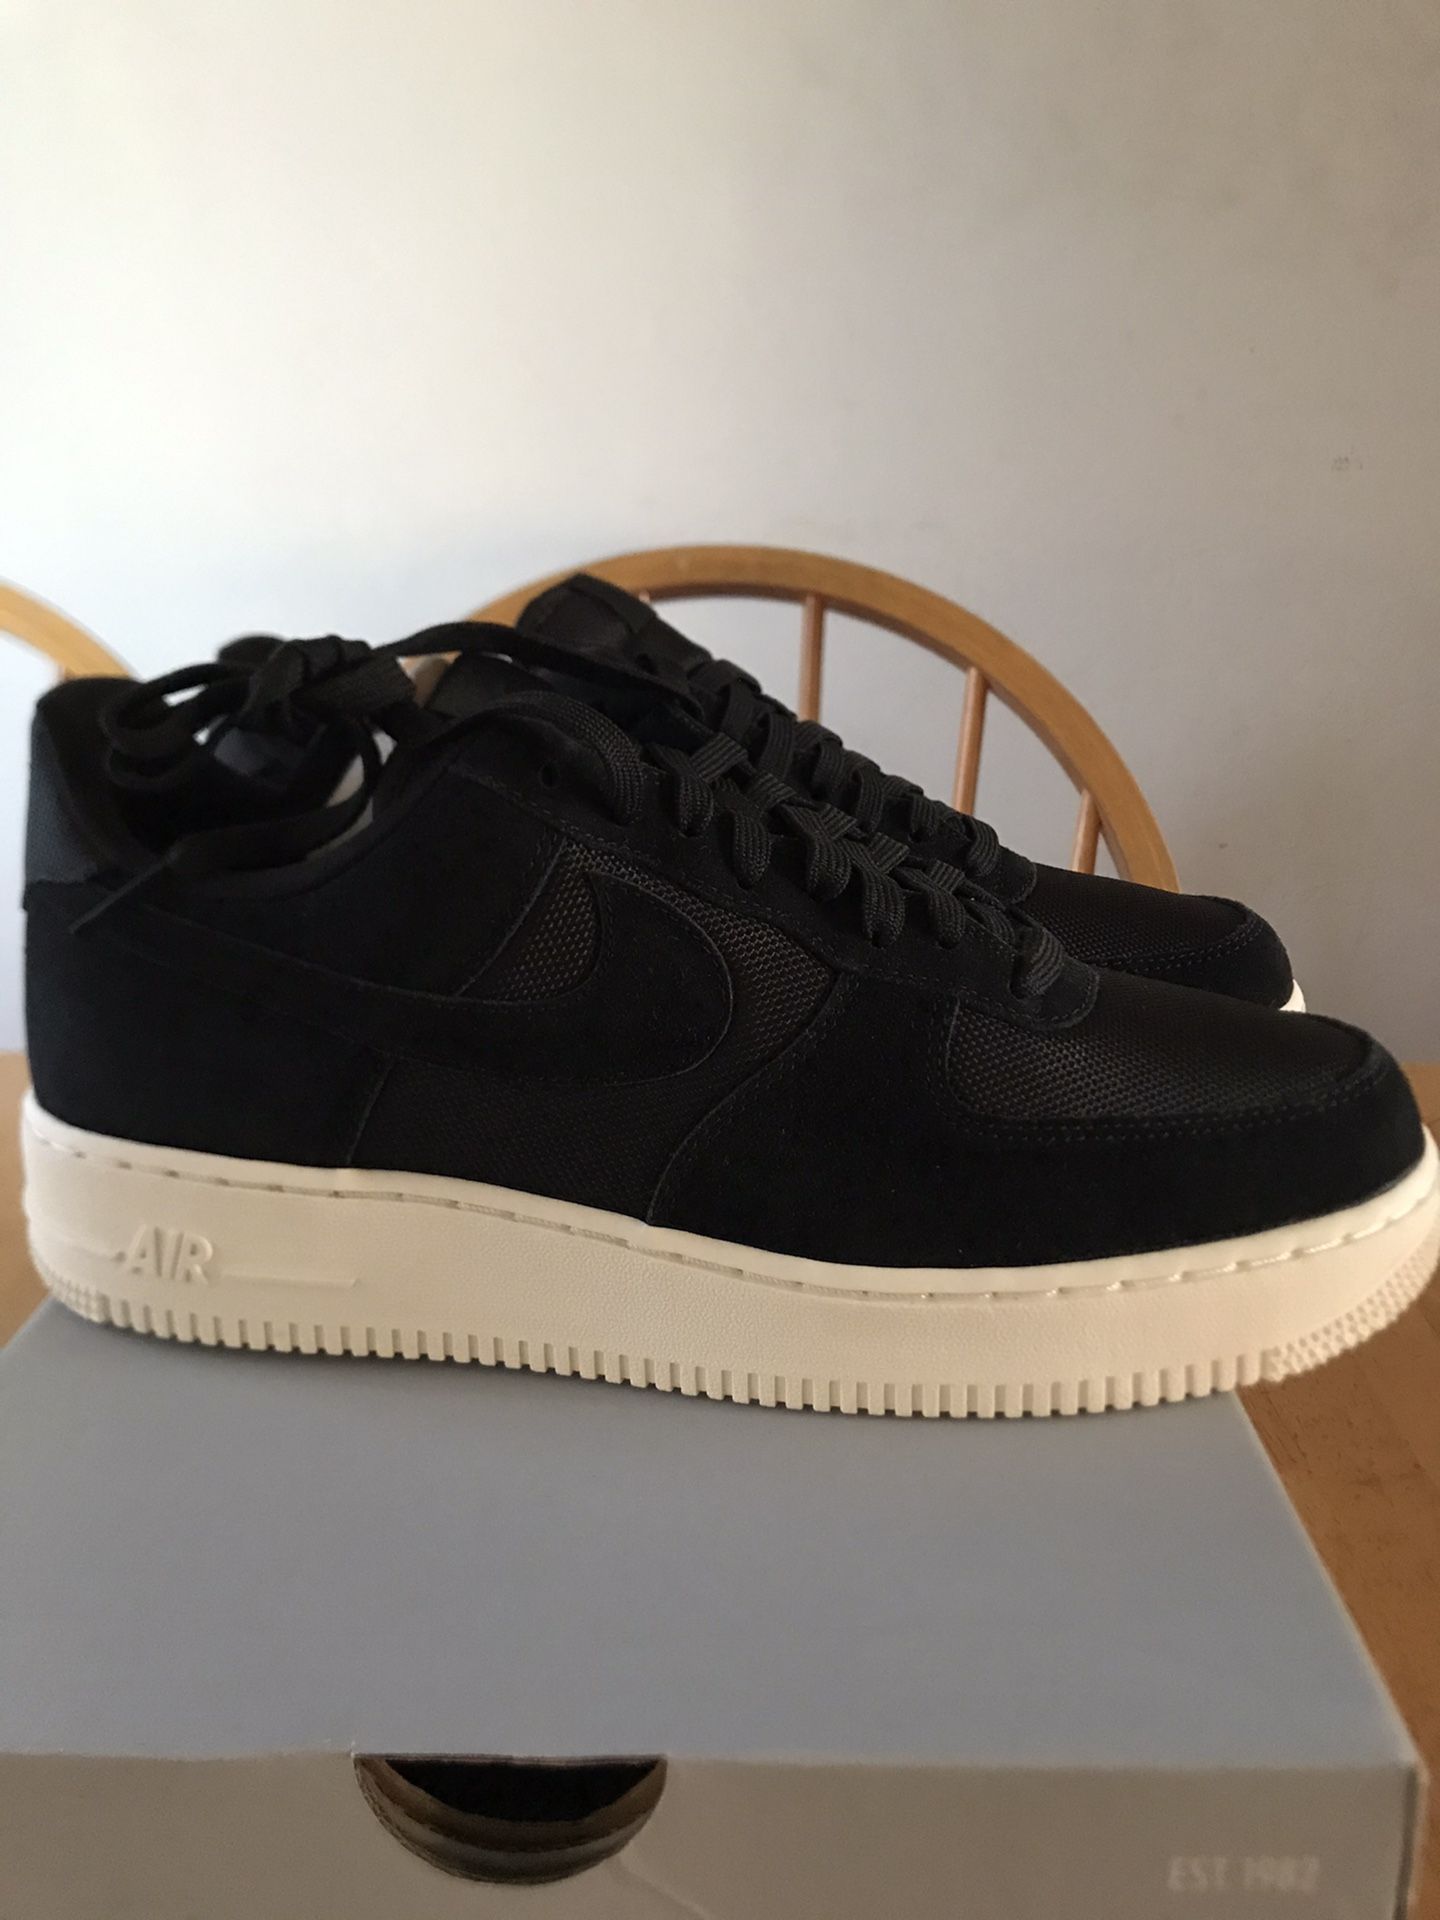 Brand new Nike Air Force One black white shoes men’s size 9 or 10